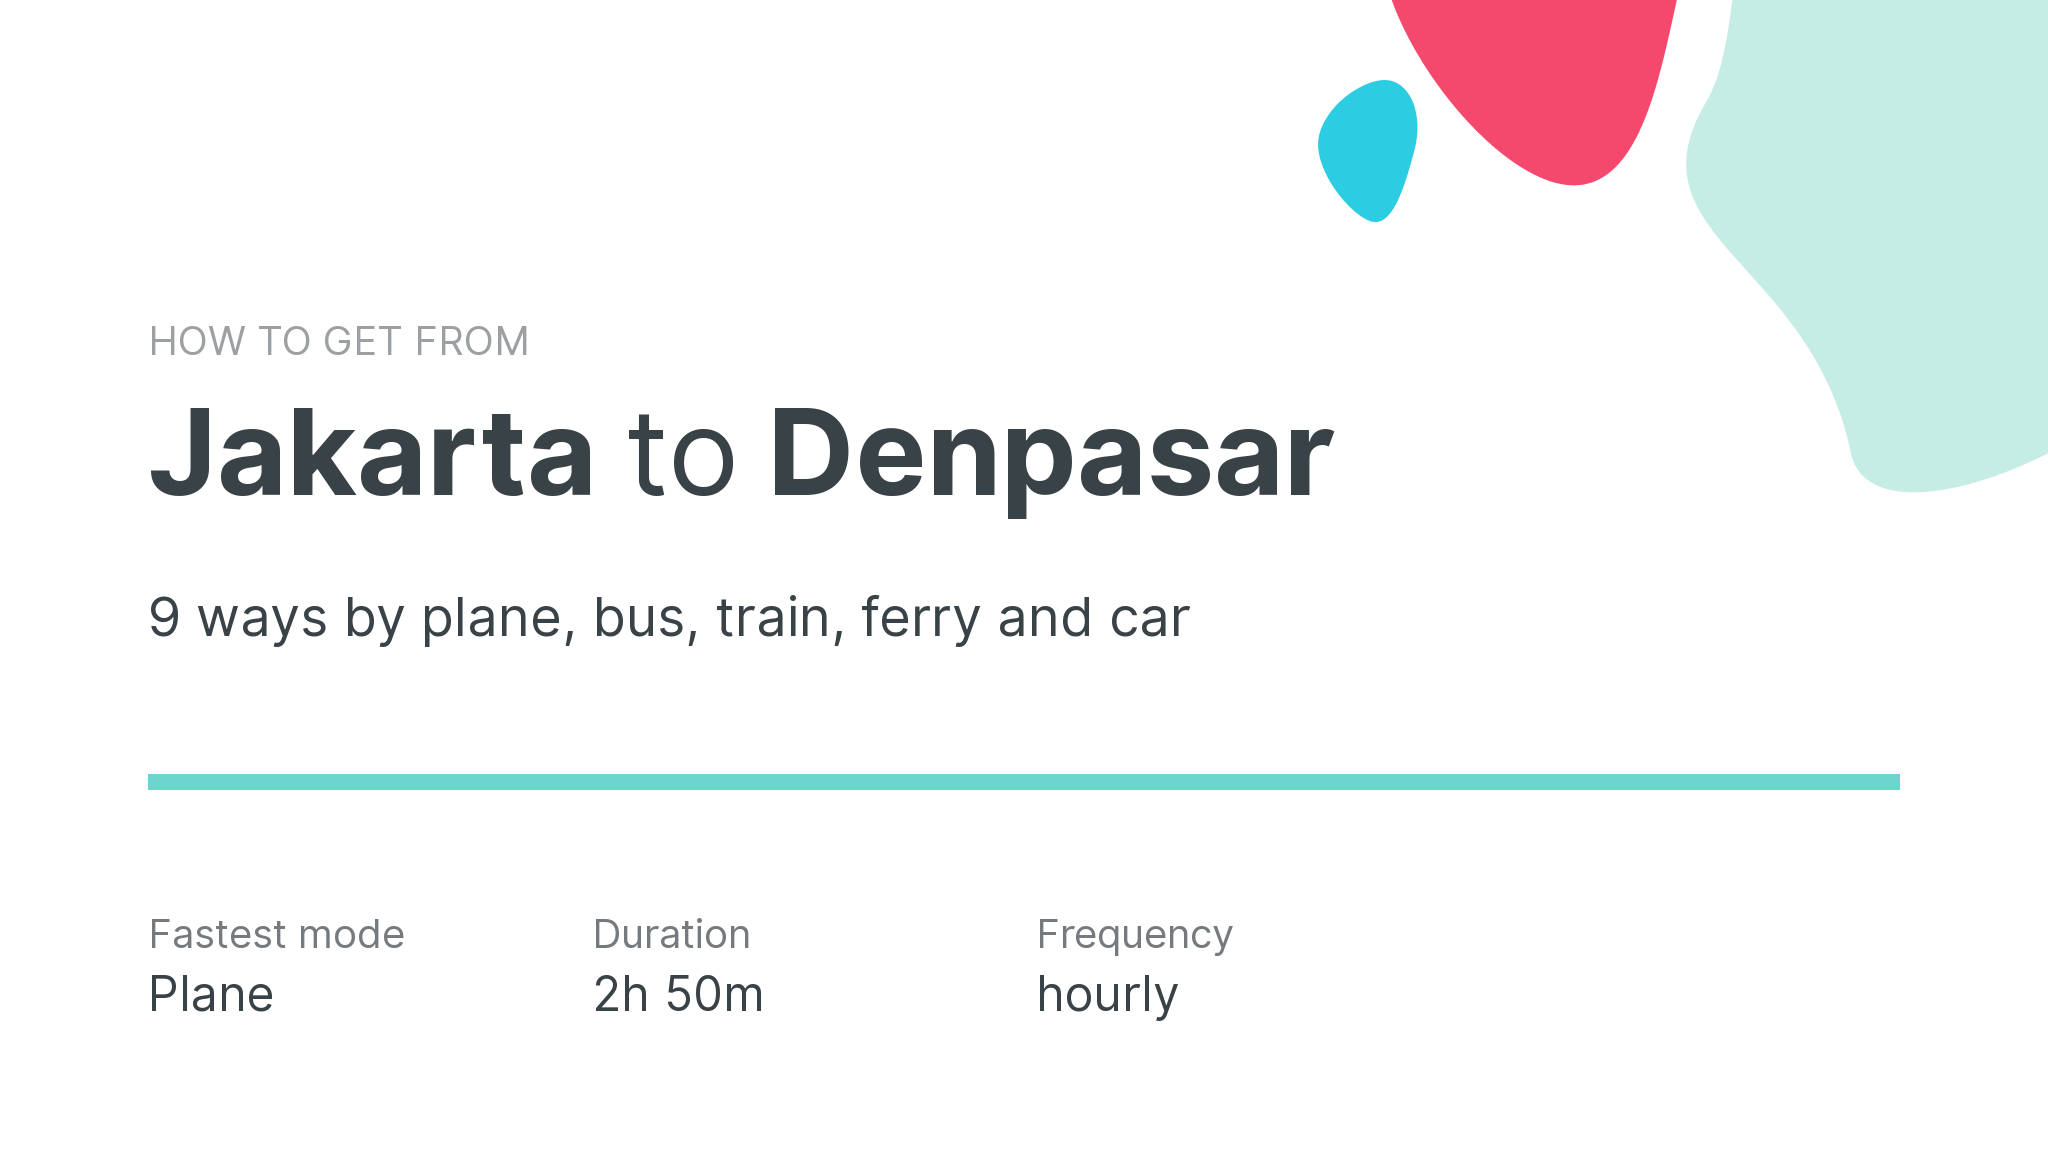 How do I get from Jakarta to Denpasar